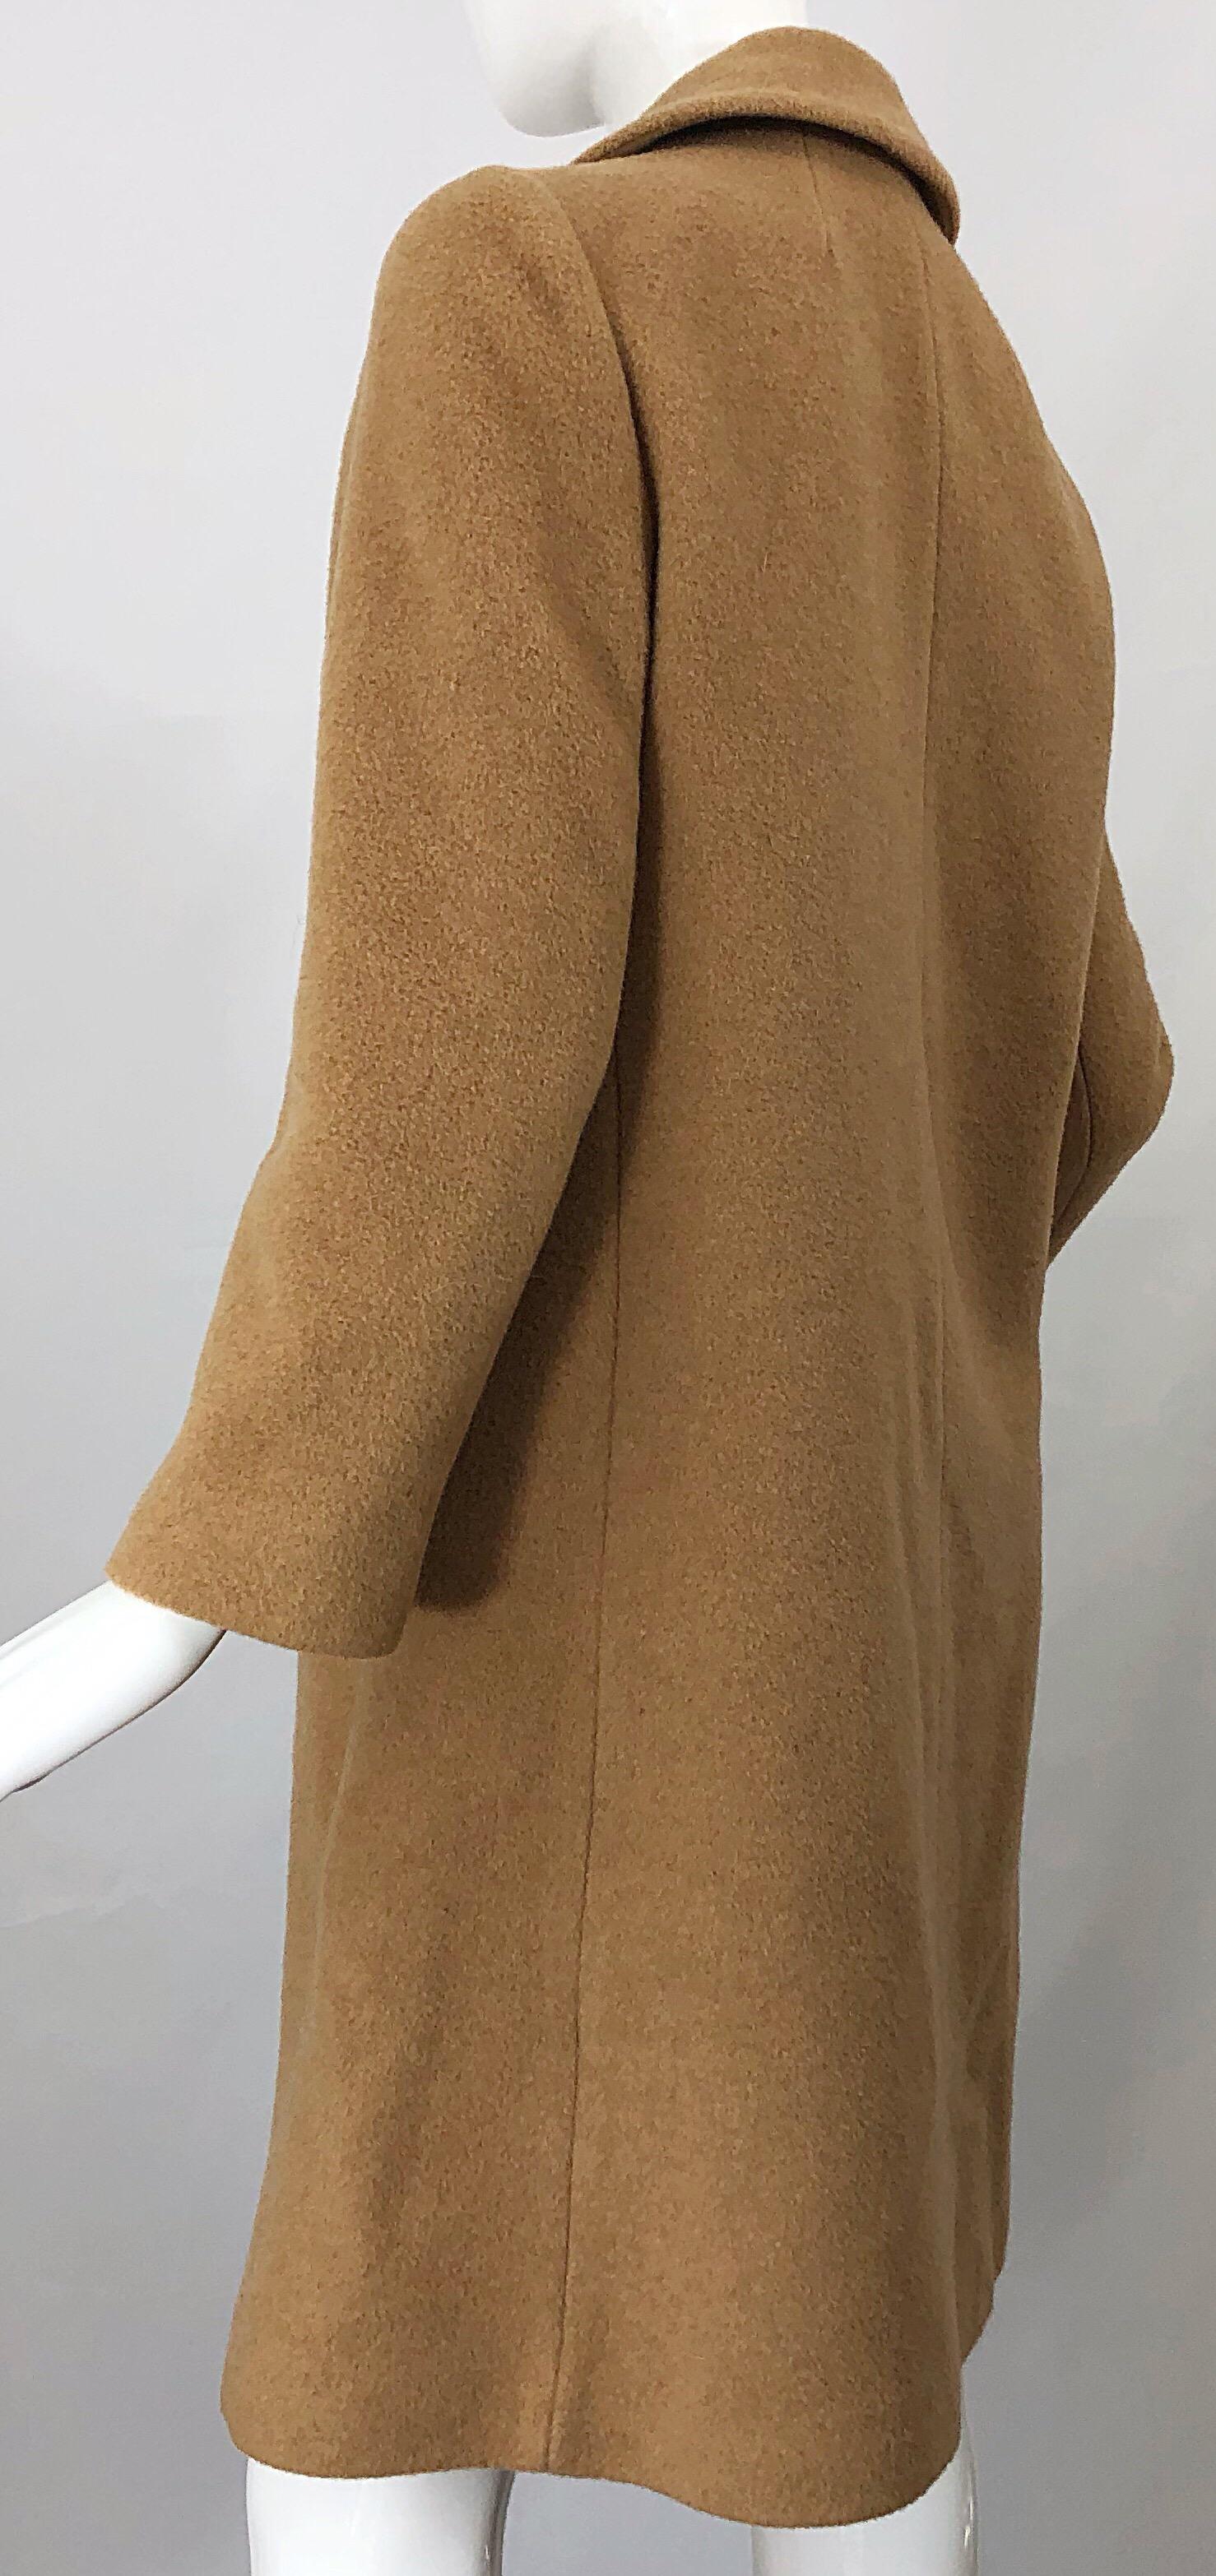 Chic 1960s Camel Tan Camels Hair Wool Double Breasted Vintage Swing Jacket Coat 2